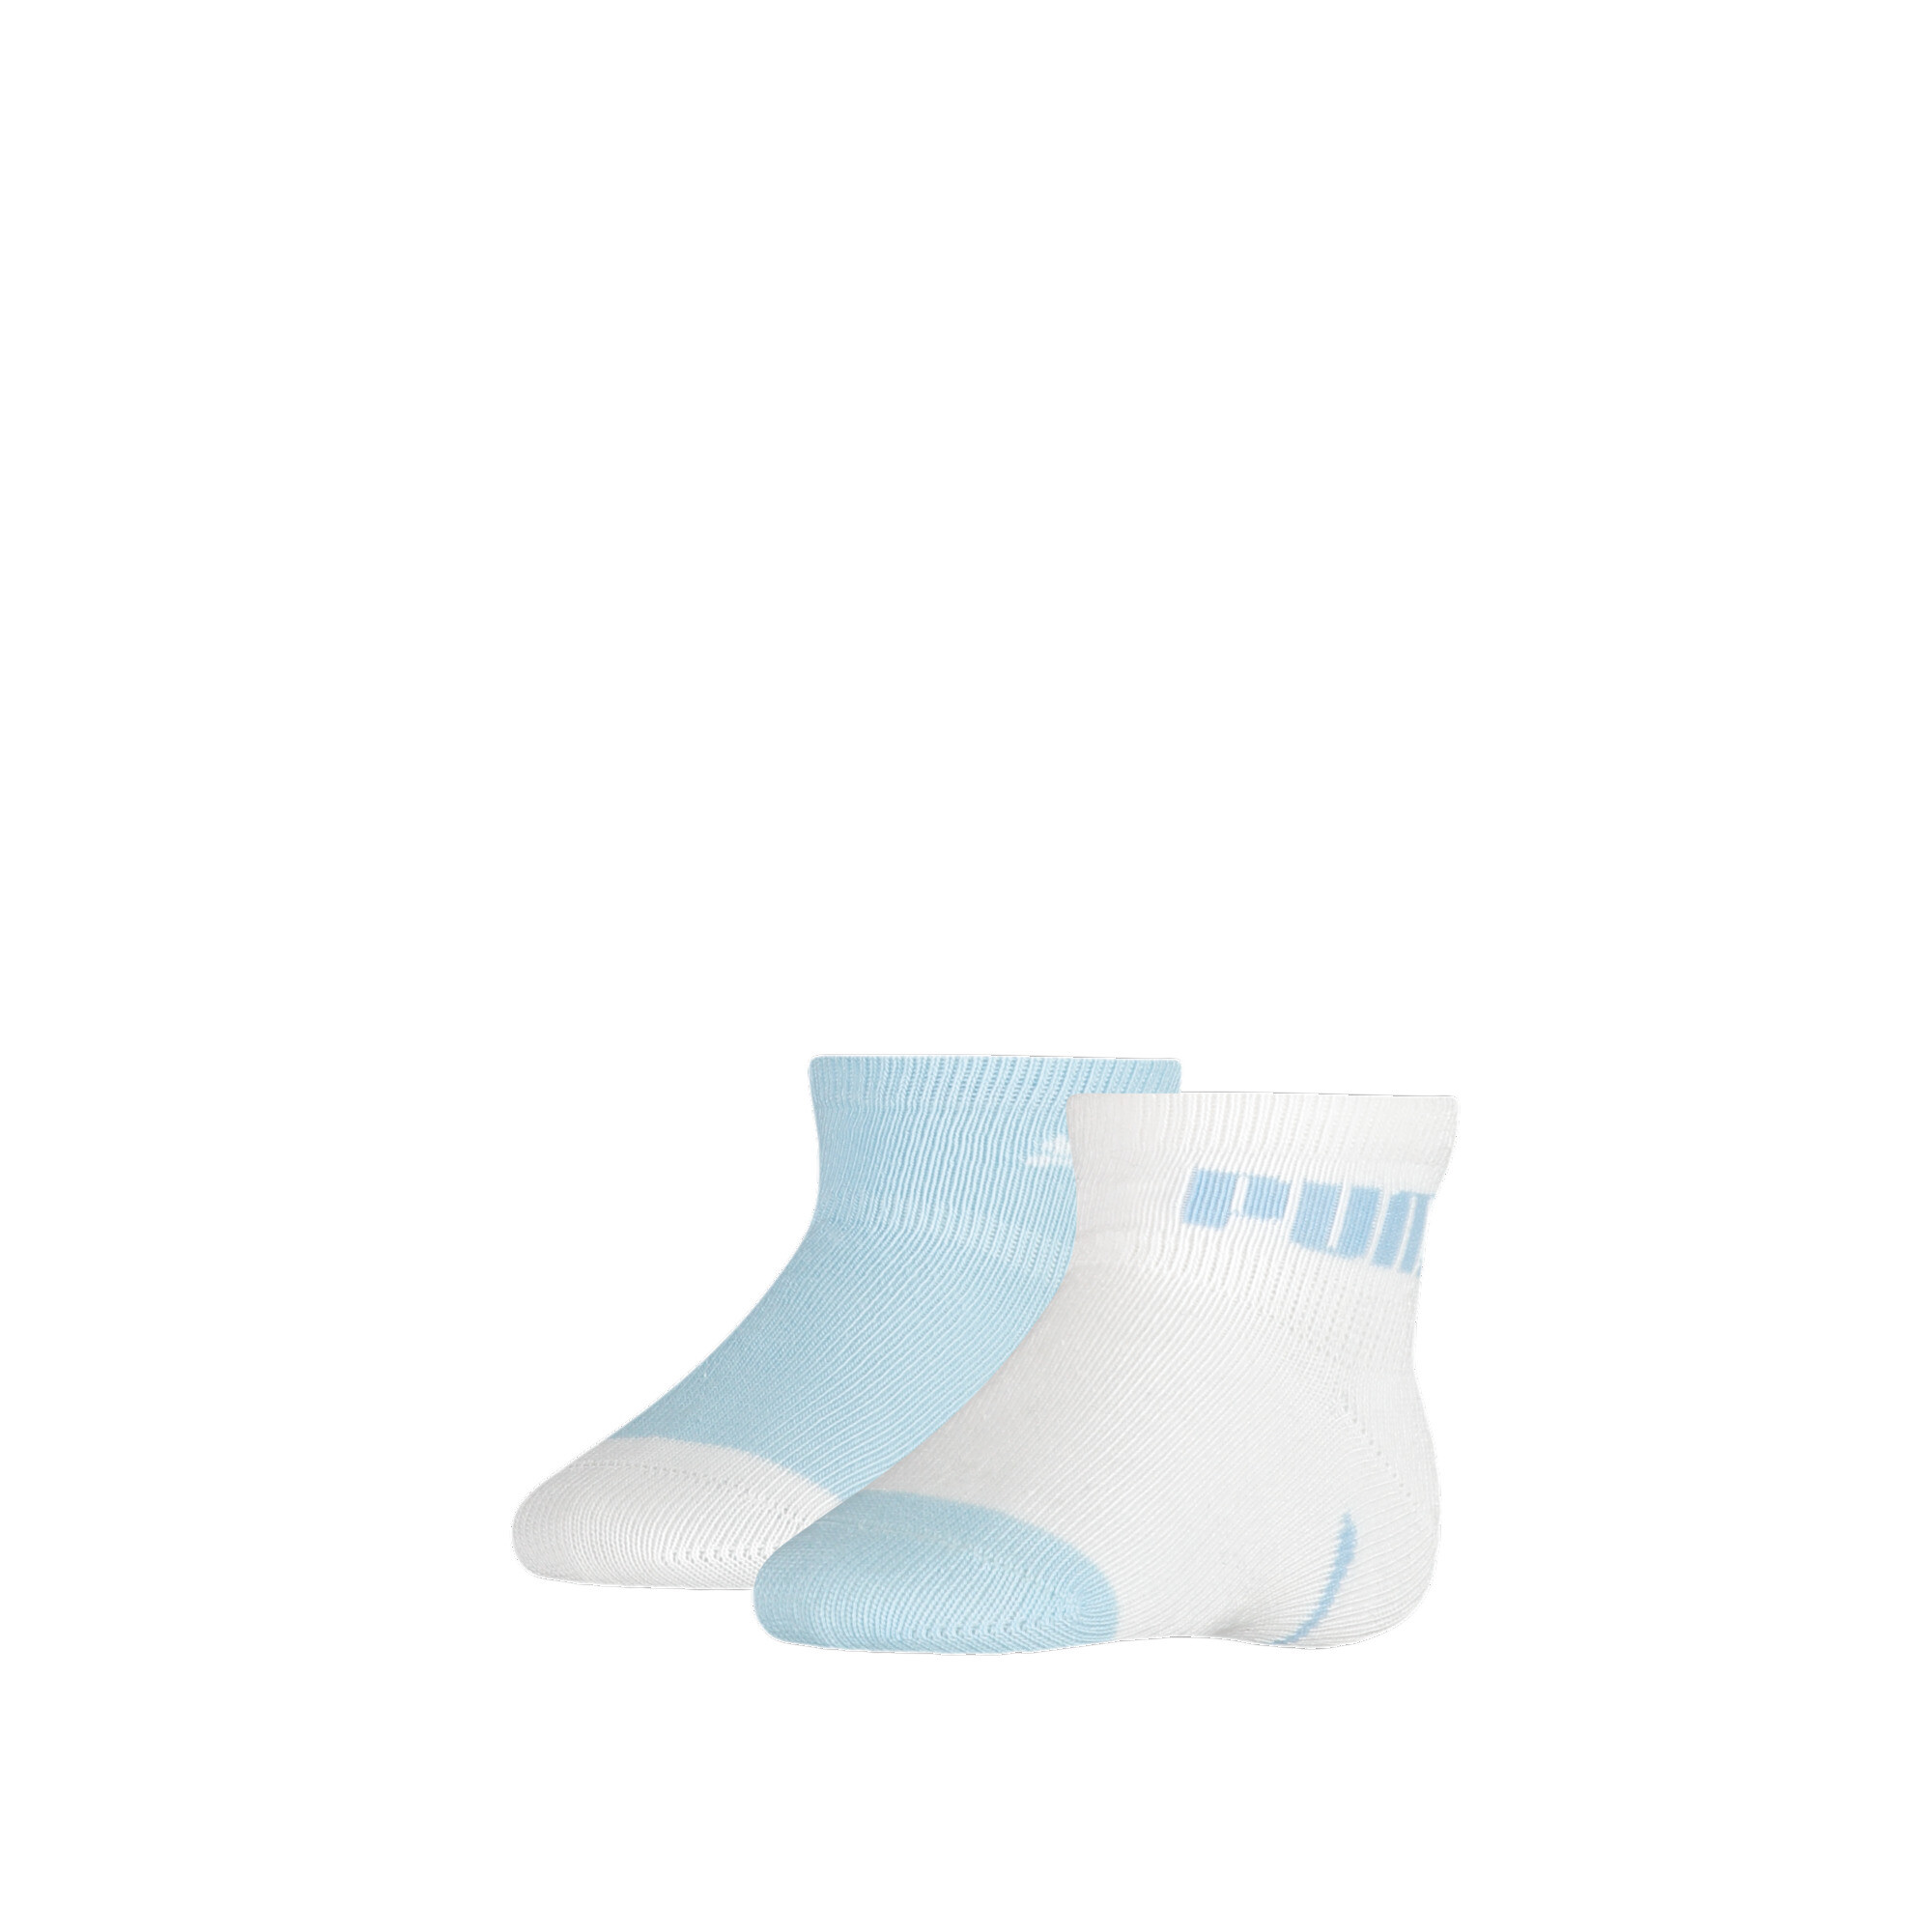 Kids' PUMA Baby Mini Cats Lifestyle Socks 2 Pack In Blue, Size 23-26